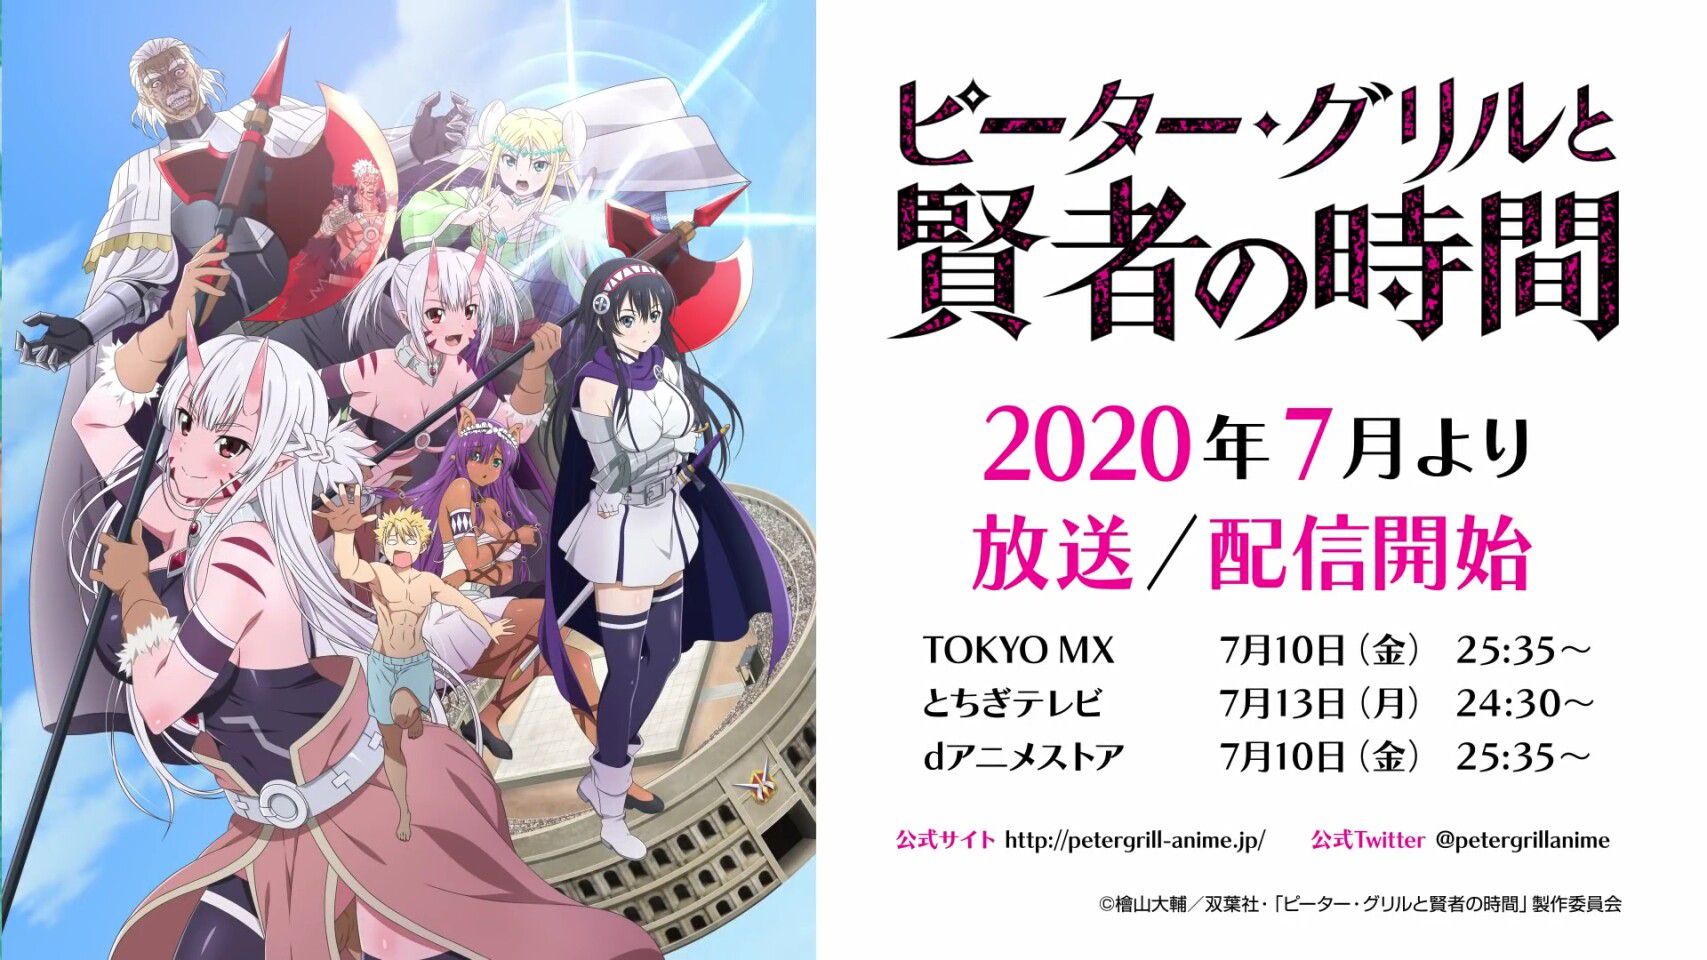 Anime [Peter Grille and the Wise Man's Time] Girls of different races seek a child species! Broadcast starts in July 33